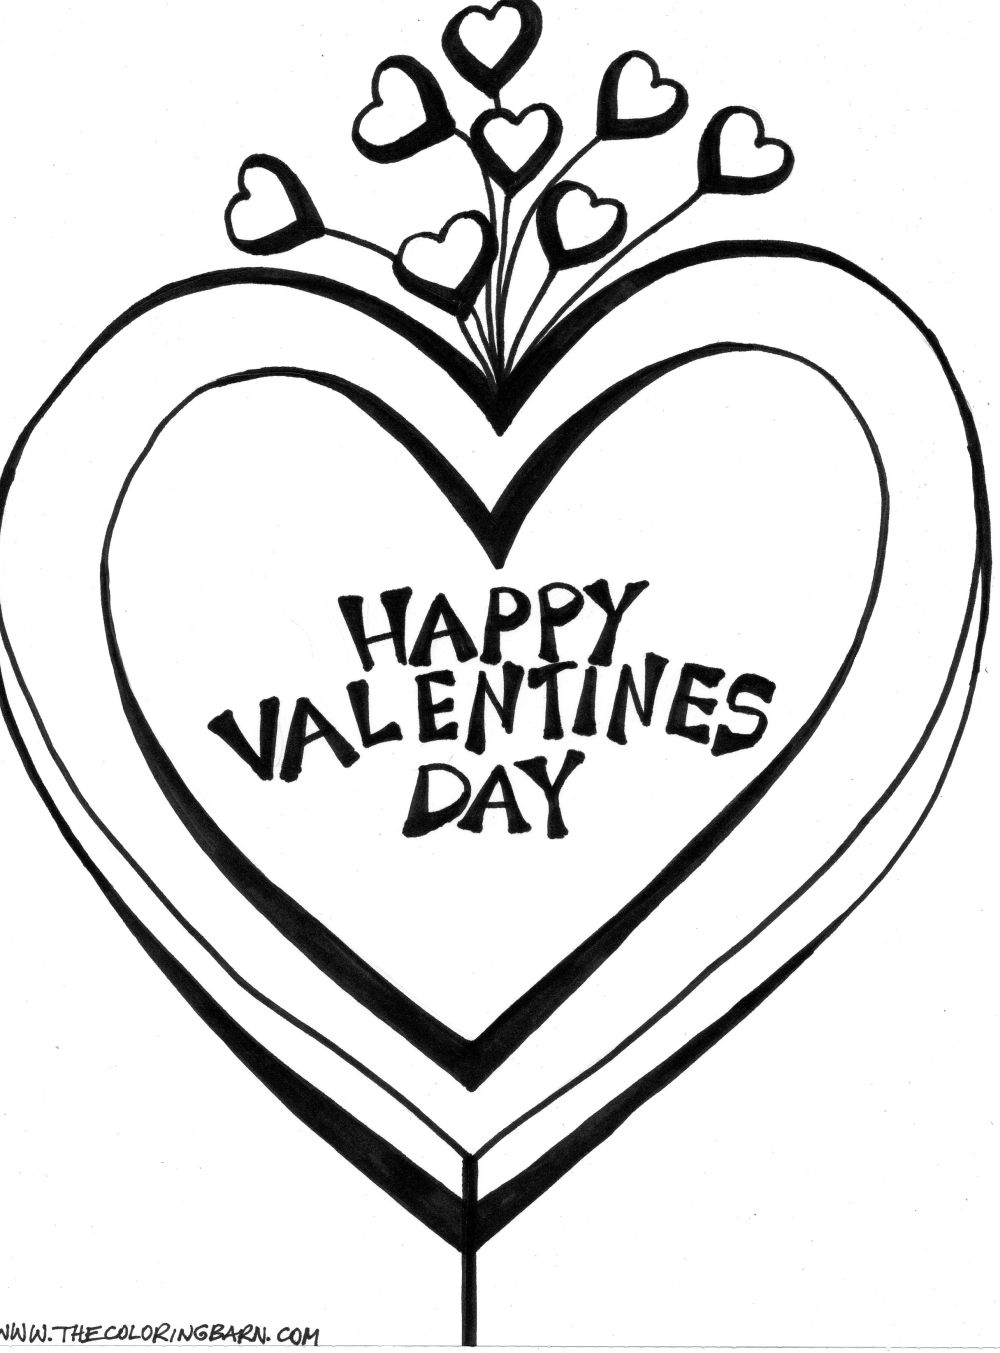  Valentines Coloring Pages | Love Coloring pages | #1